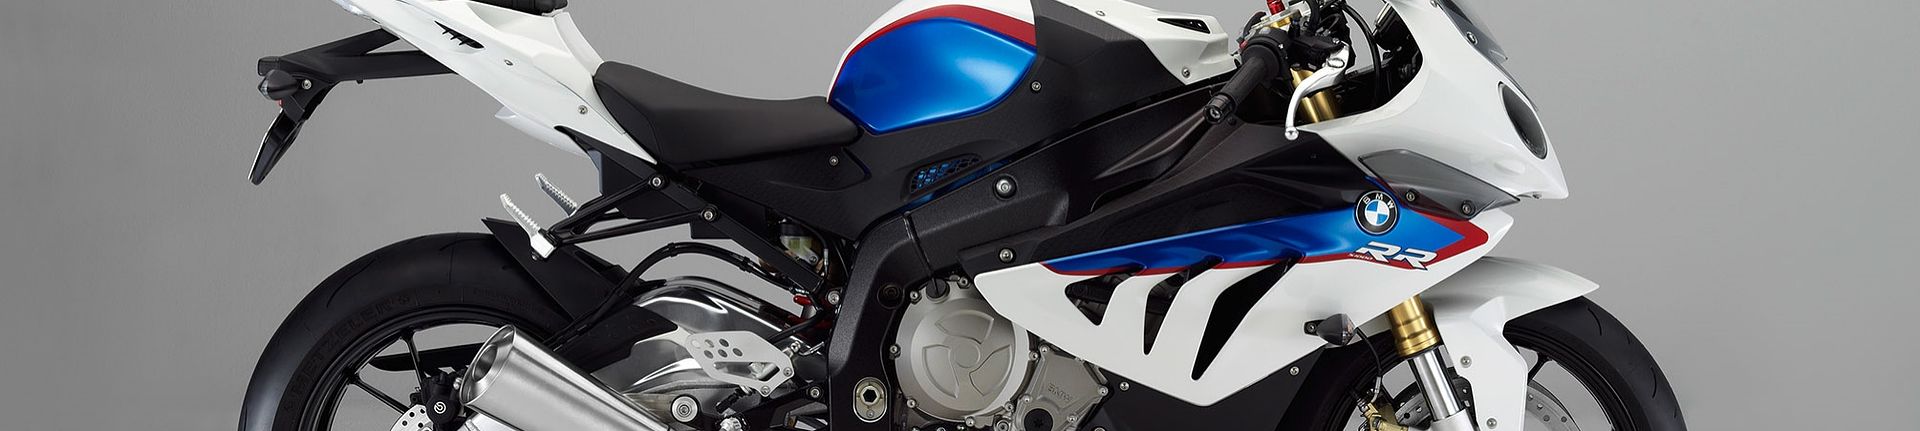 Aftermarket fairings for bmw motorcycles #2